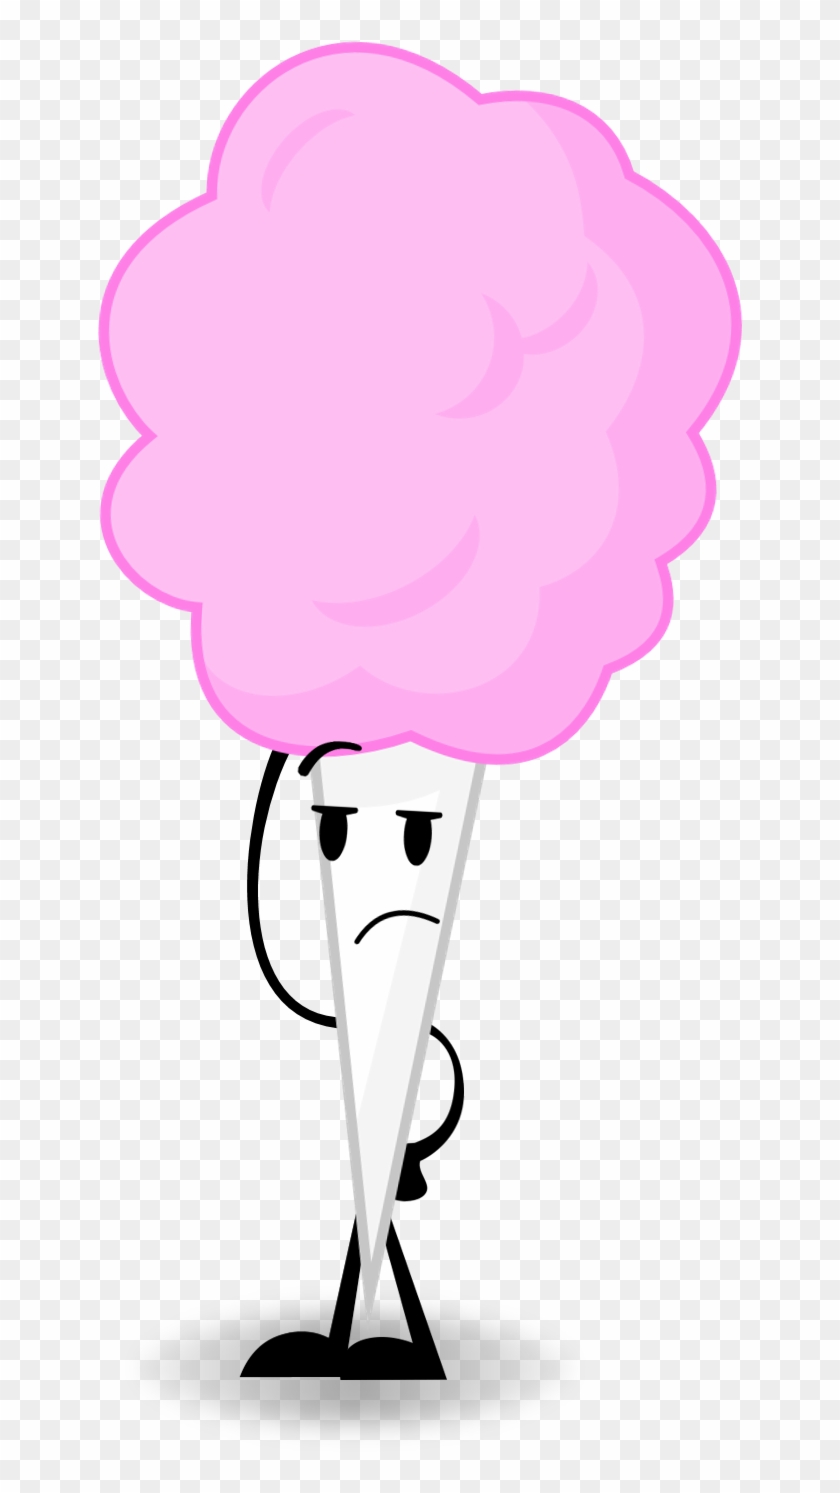 Cotton Candy - Cotton Candy Object Show #637550